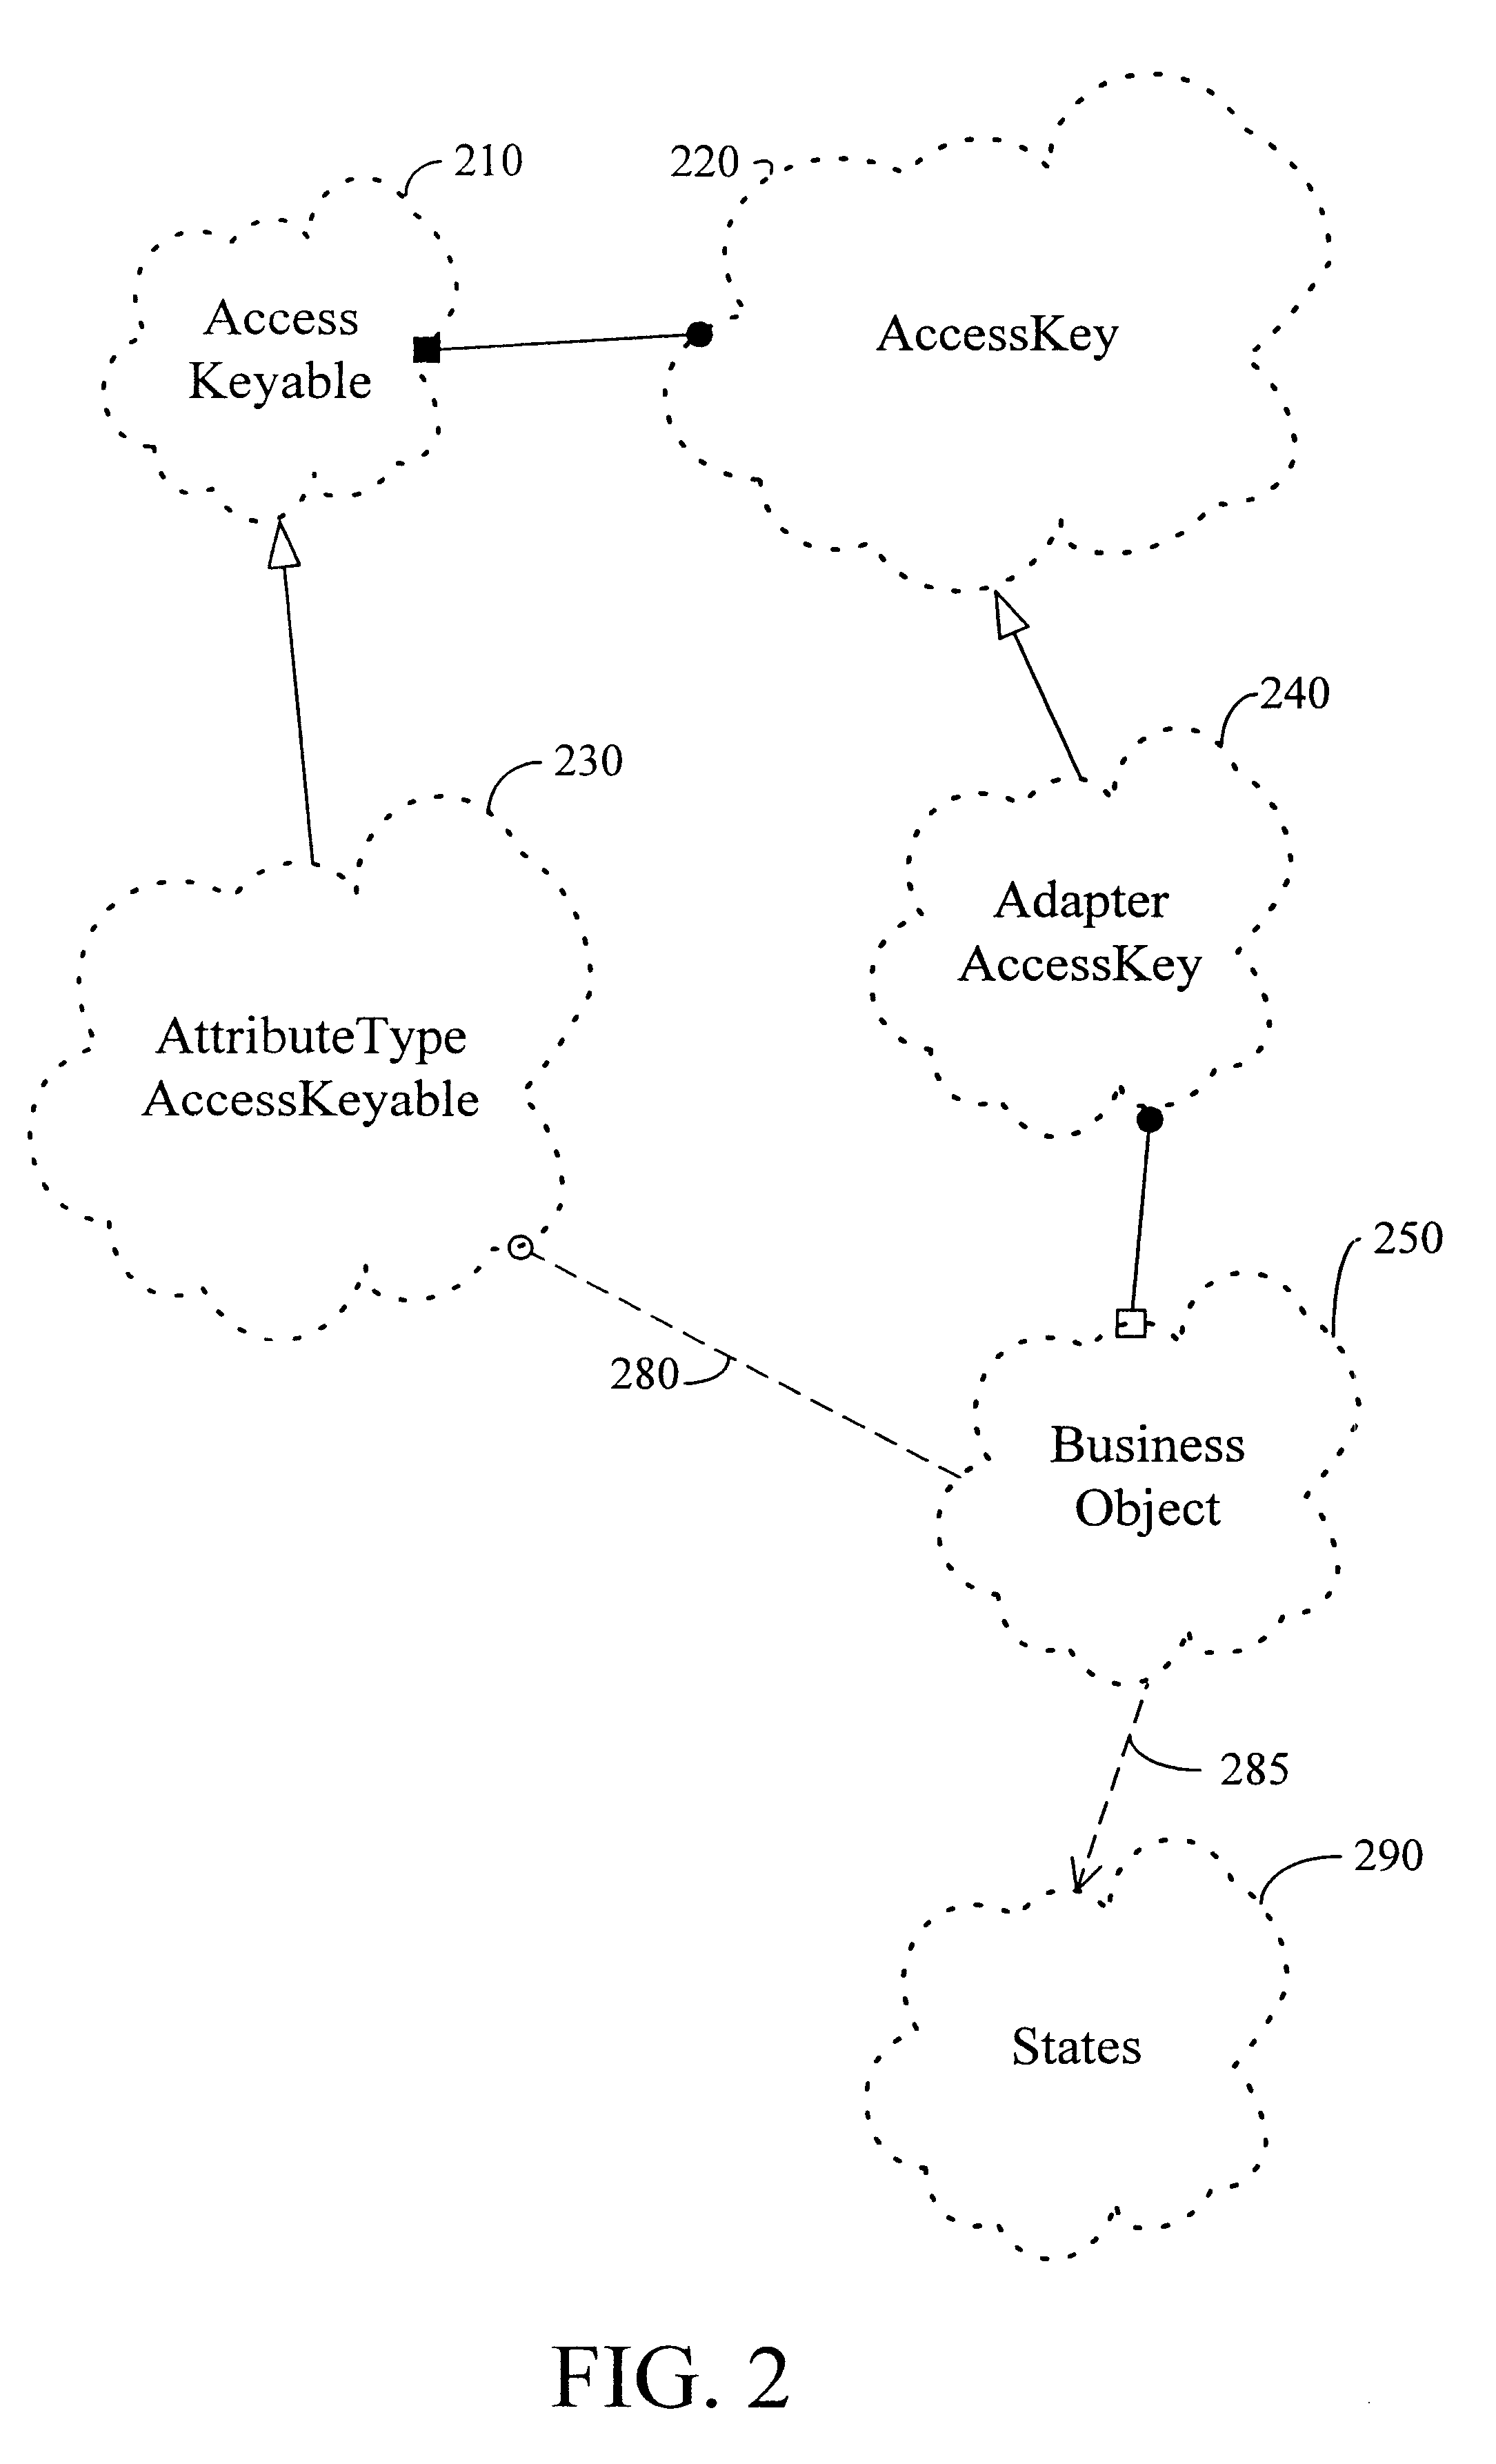 Use of adapter key to increase performance when updating a value referenced by a data access object